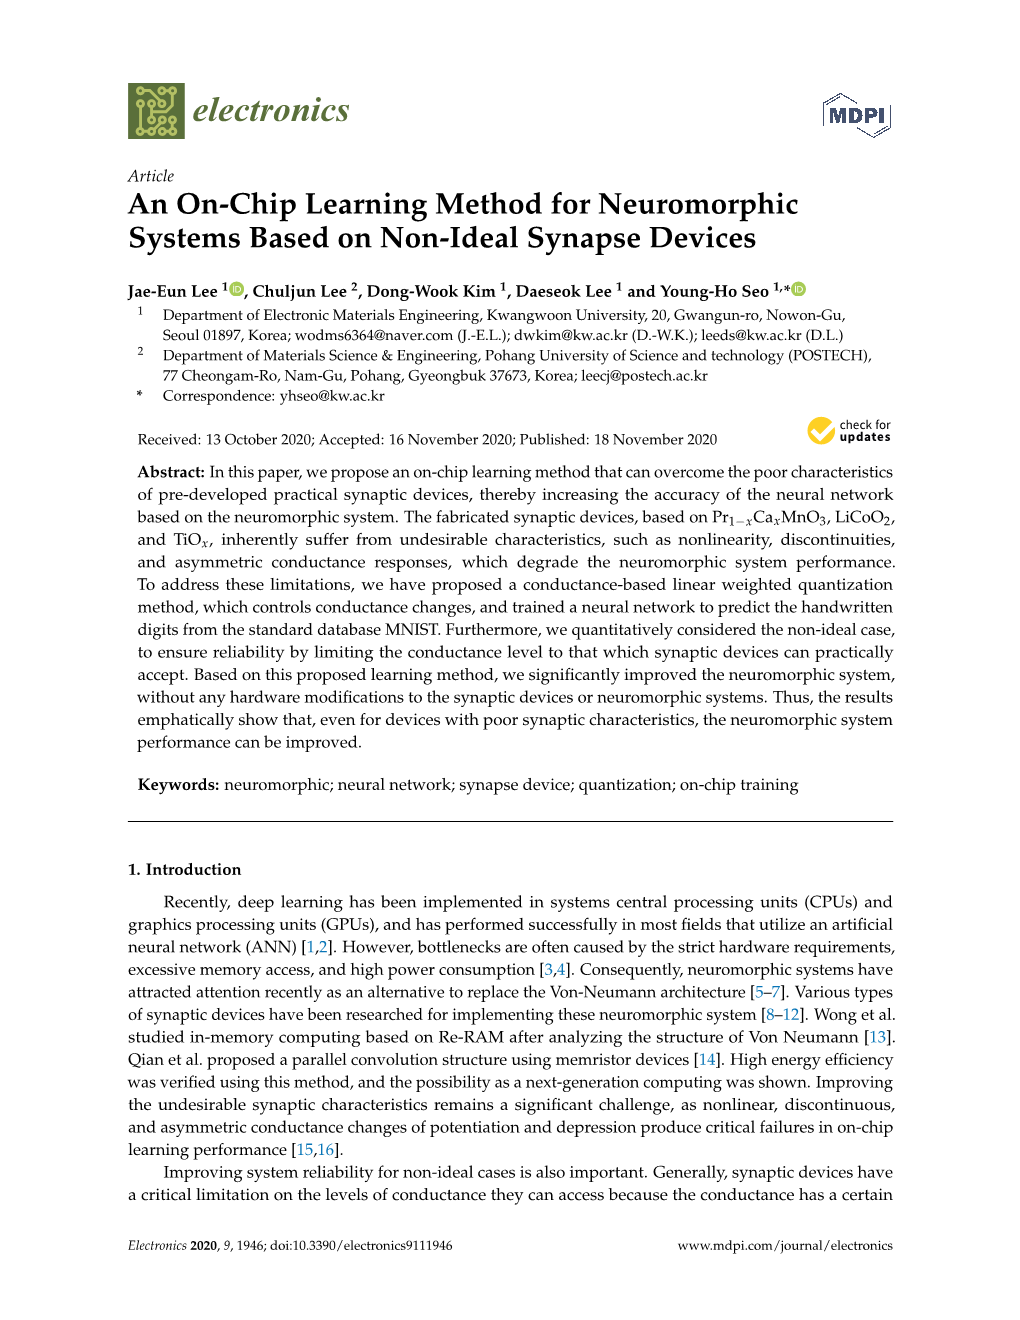 An On-Chip Learning Method for Neuromorphic Systems Based on Non-Ideal Synapse Devices